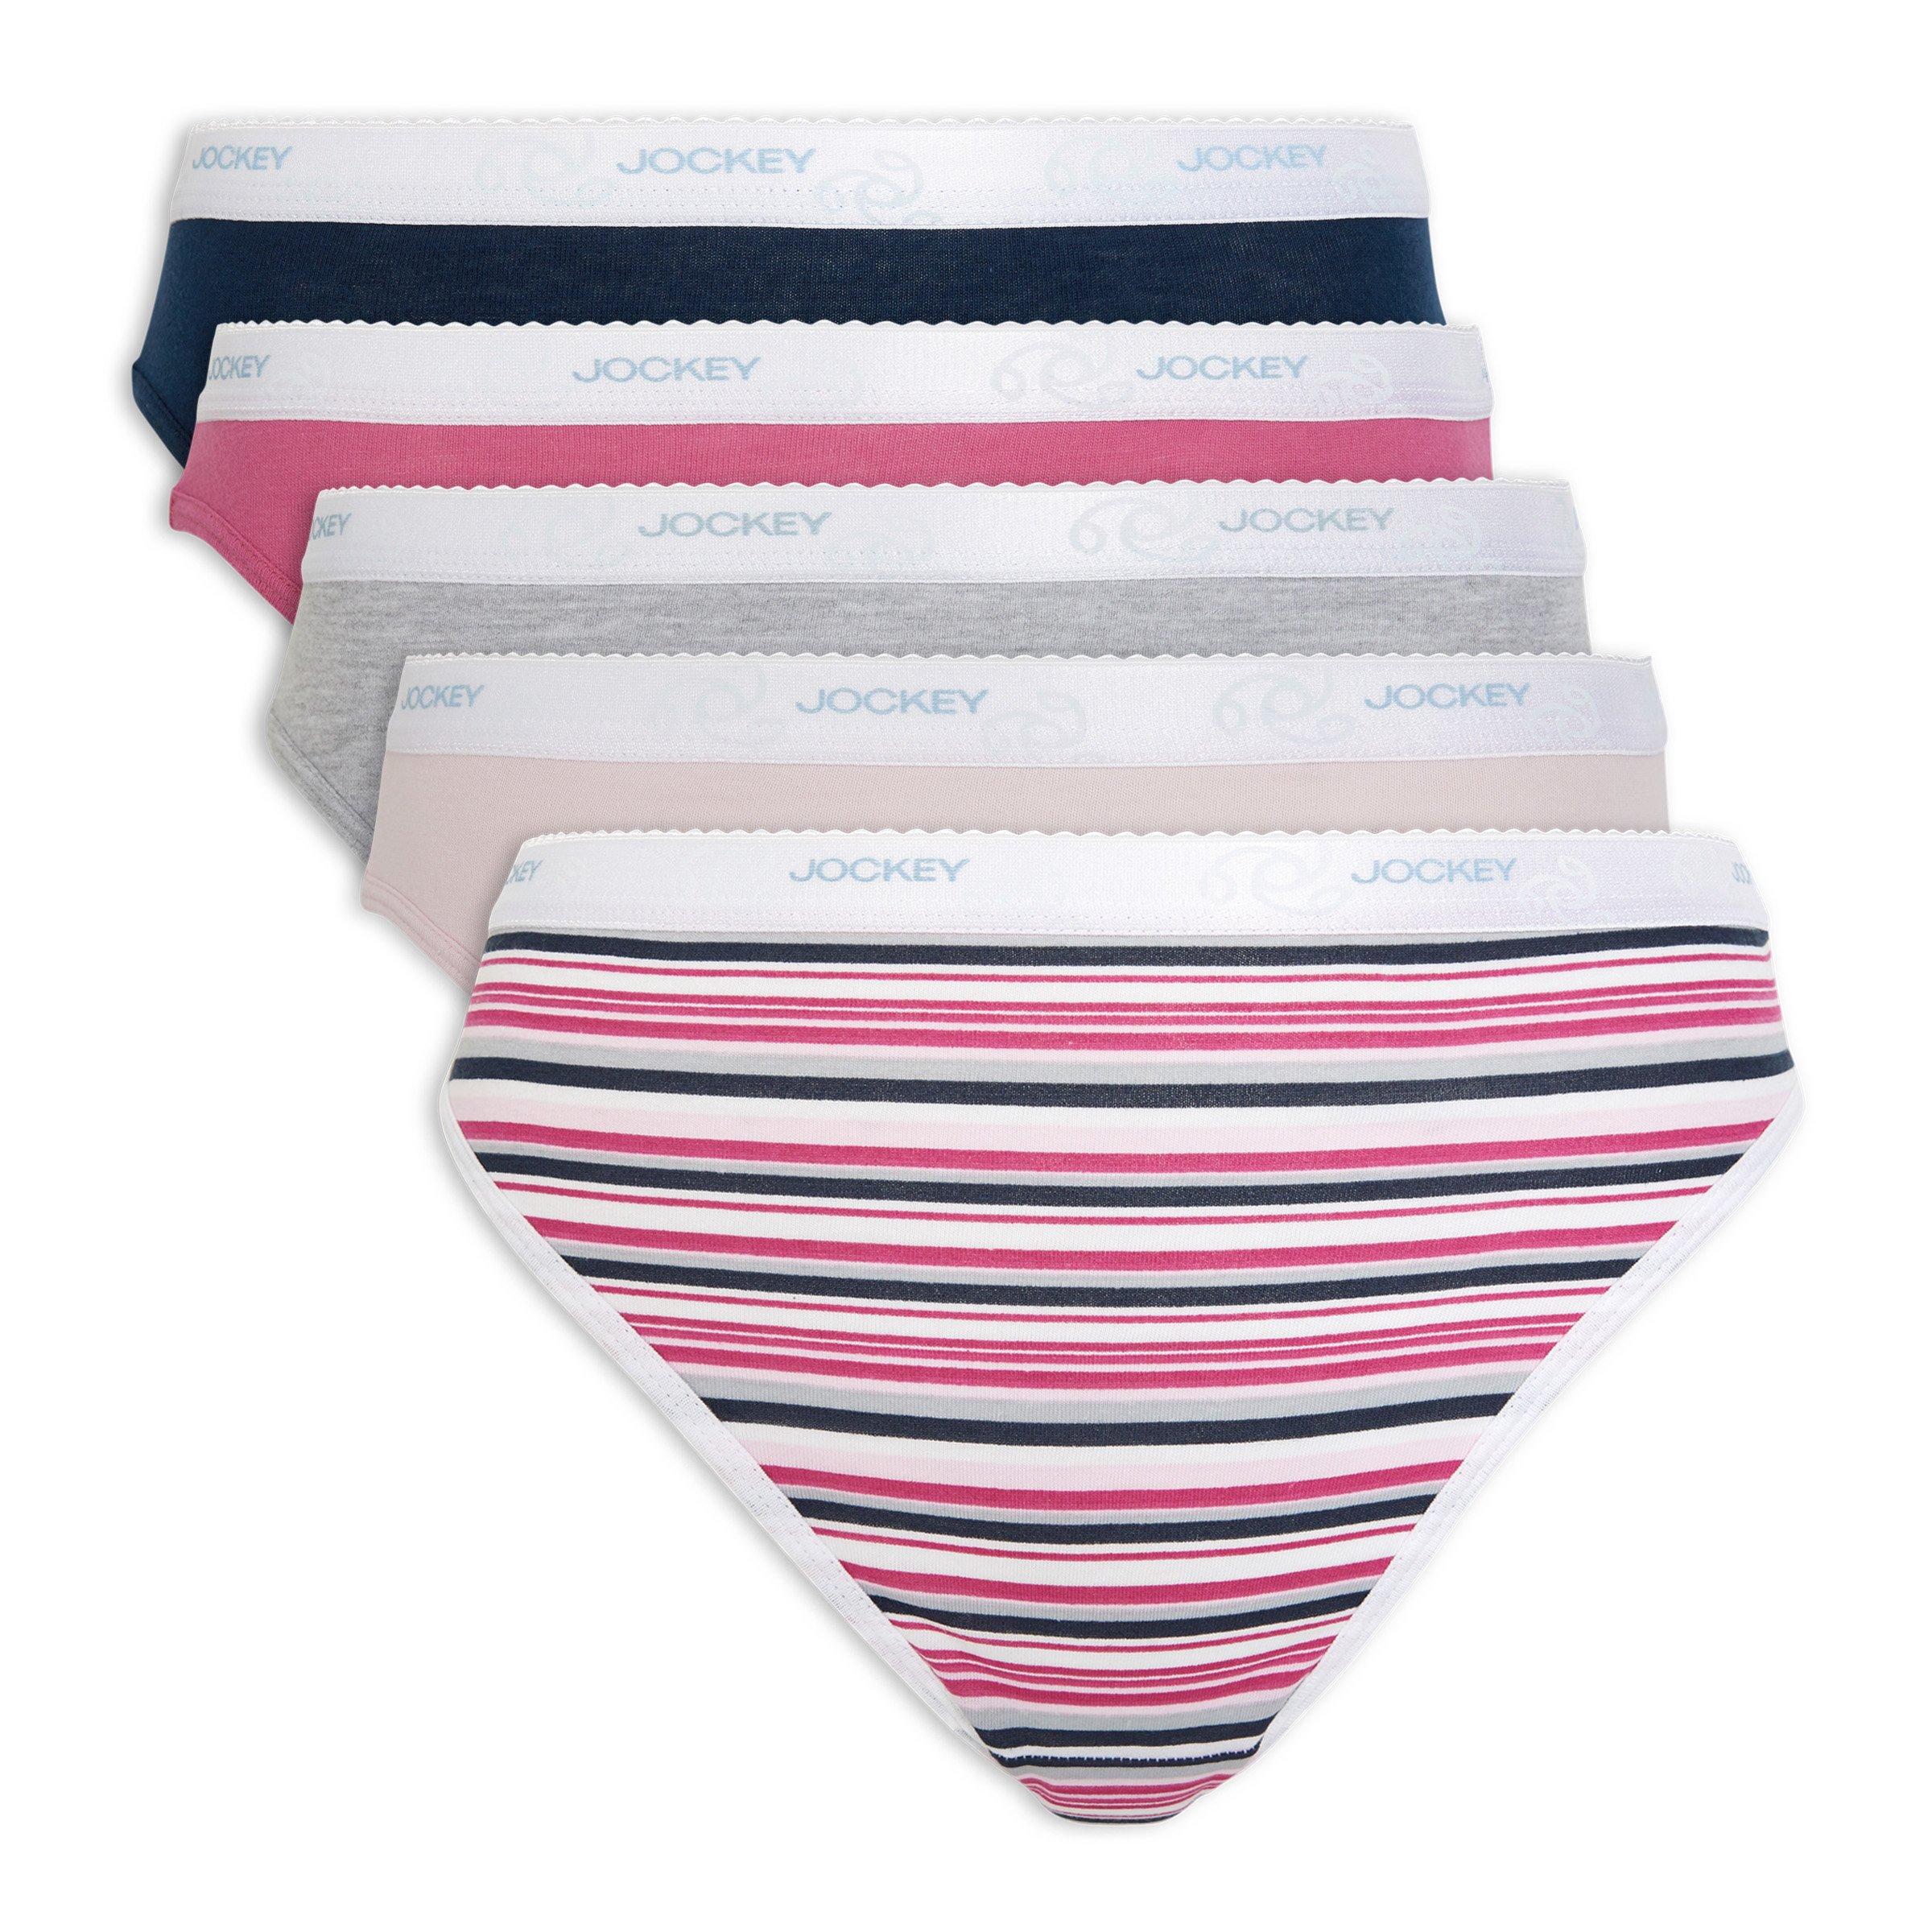 5-pack French Cut Panties (3098940)